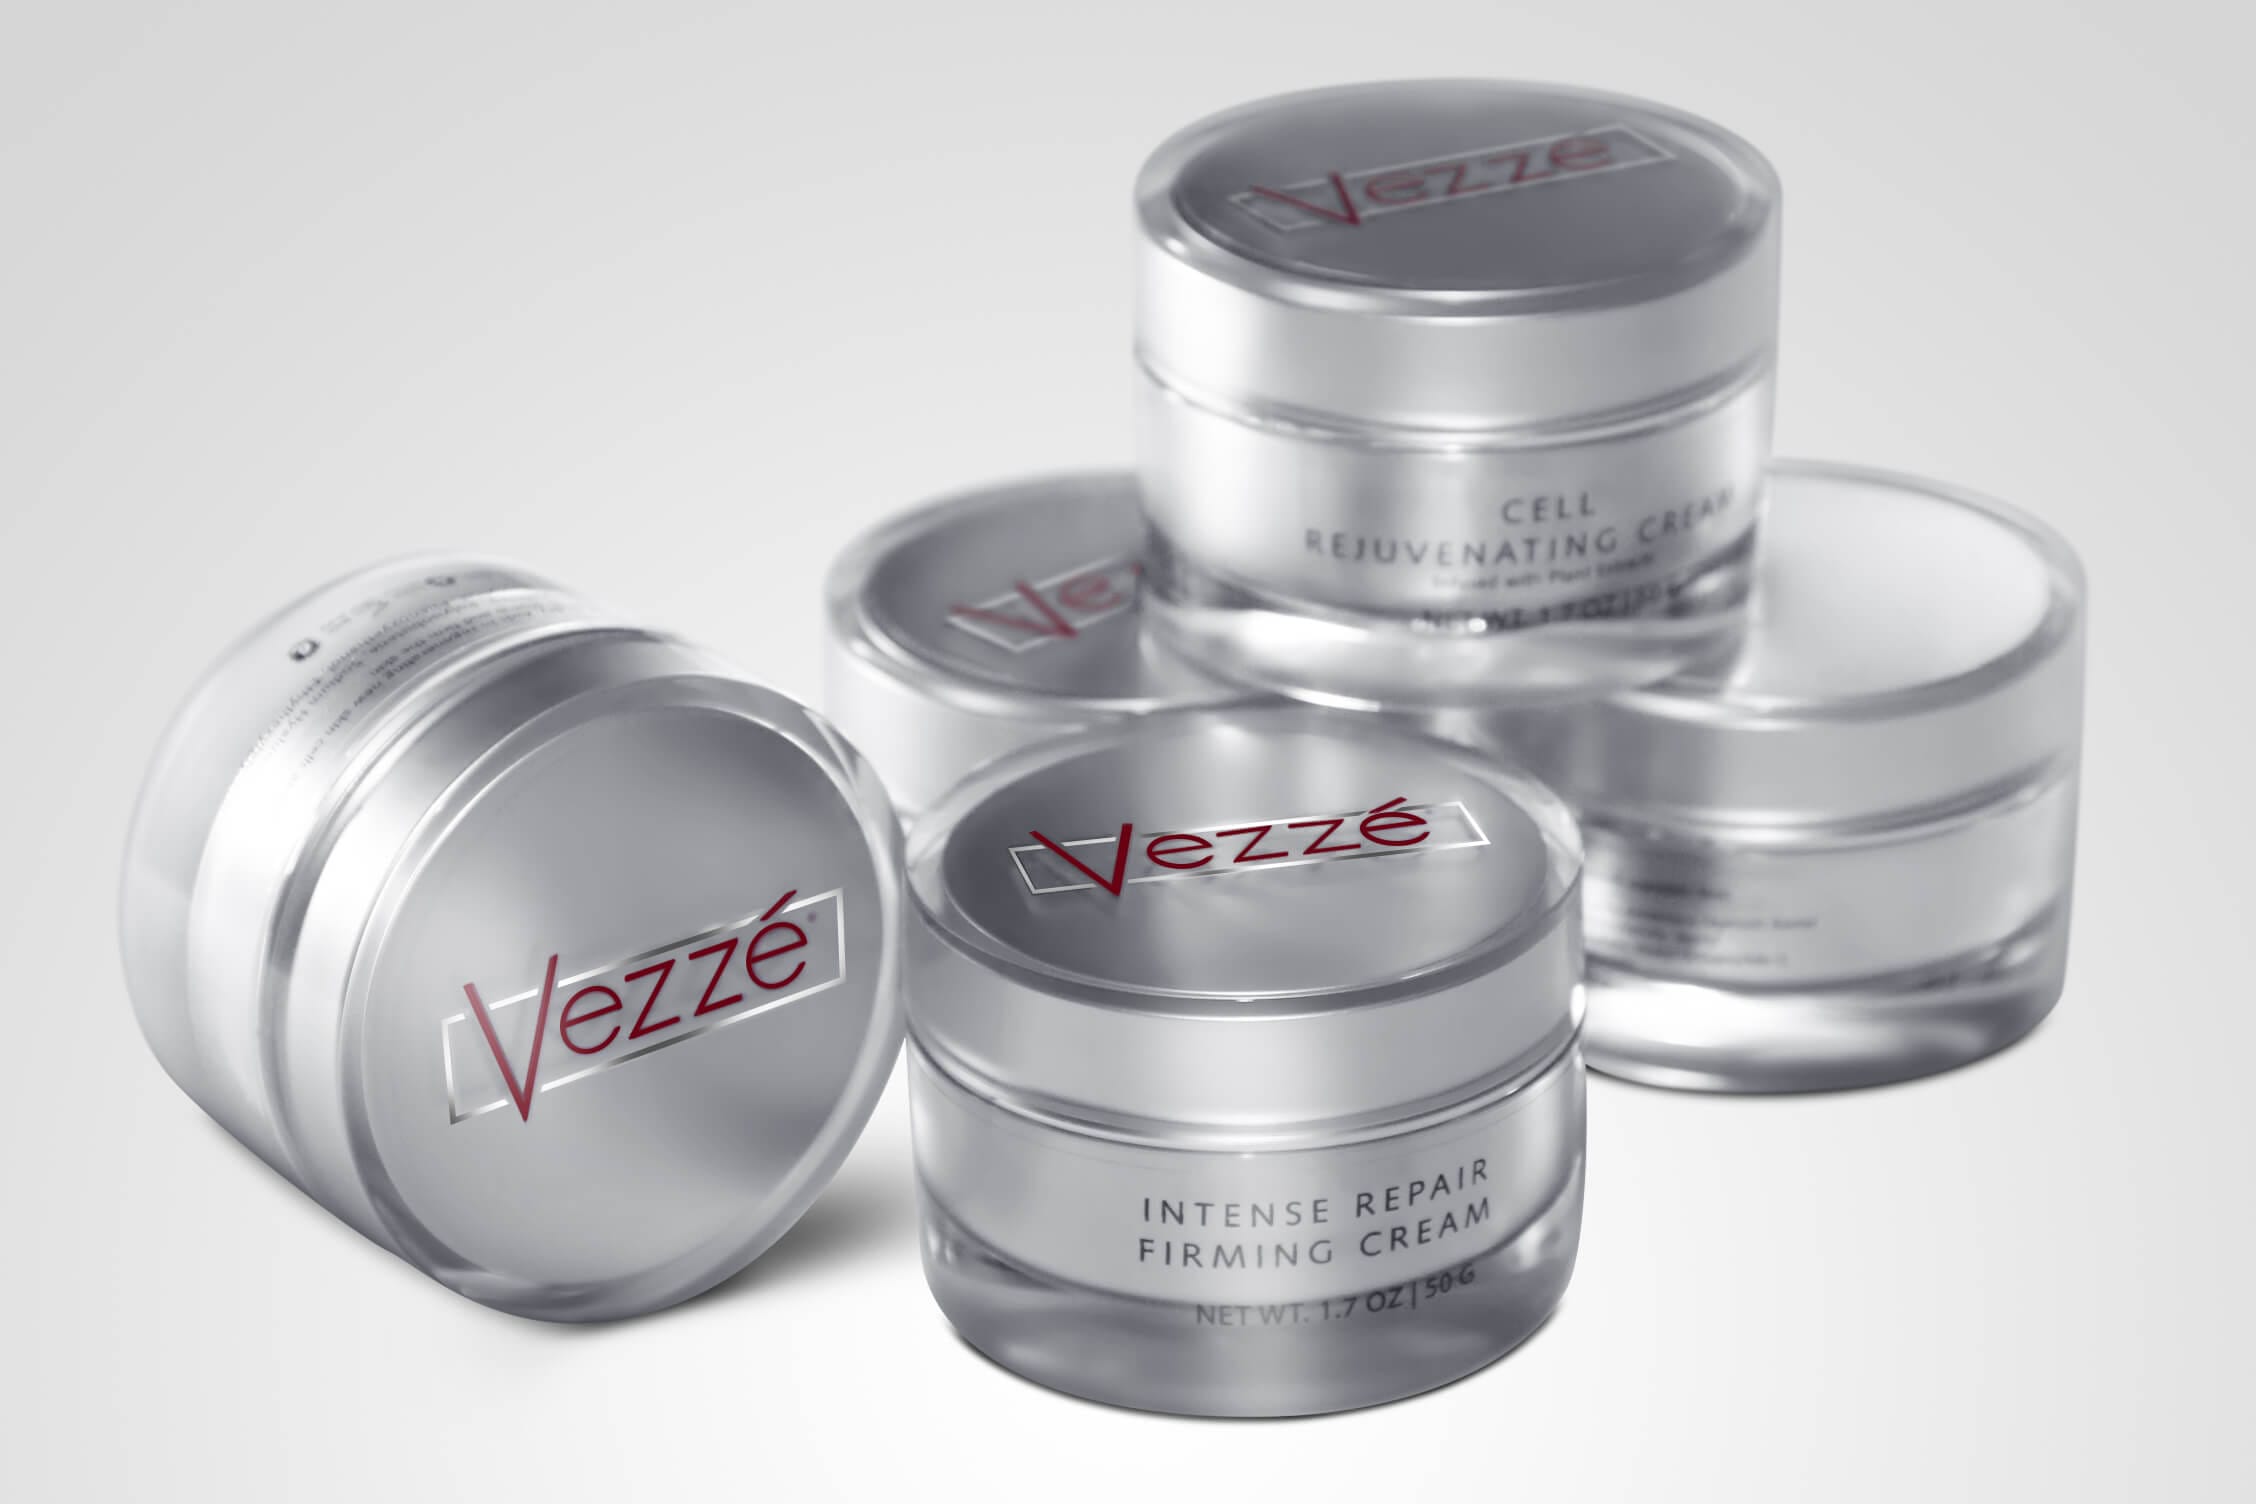 With over thirty years of professional skin care experience, as well as the love of helping her clients and a desire to educate, led the founder of Vezze to create this innovative skin care line.